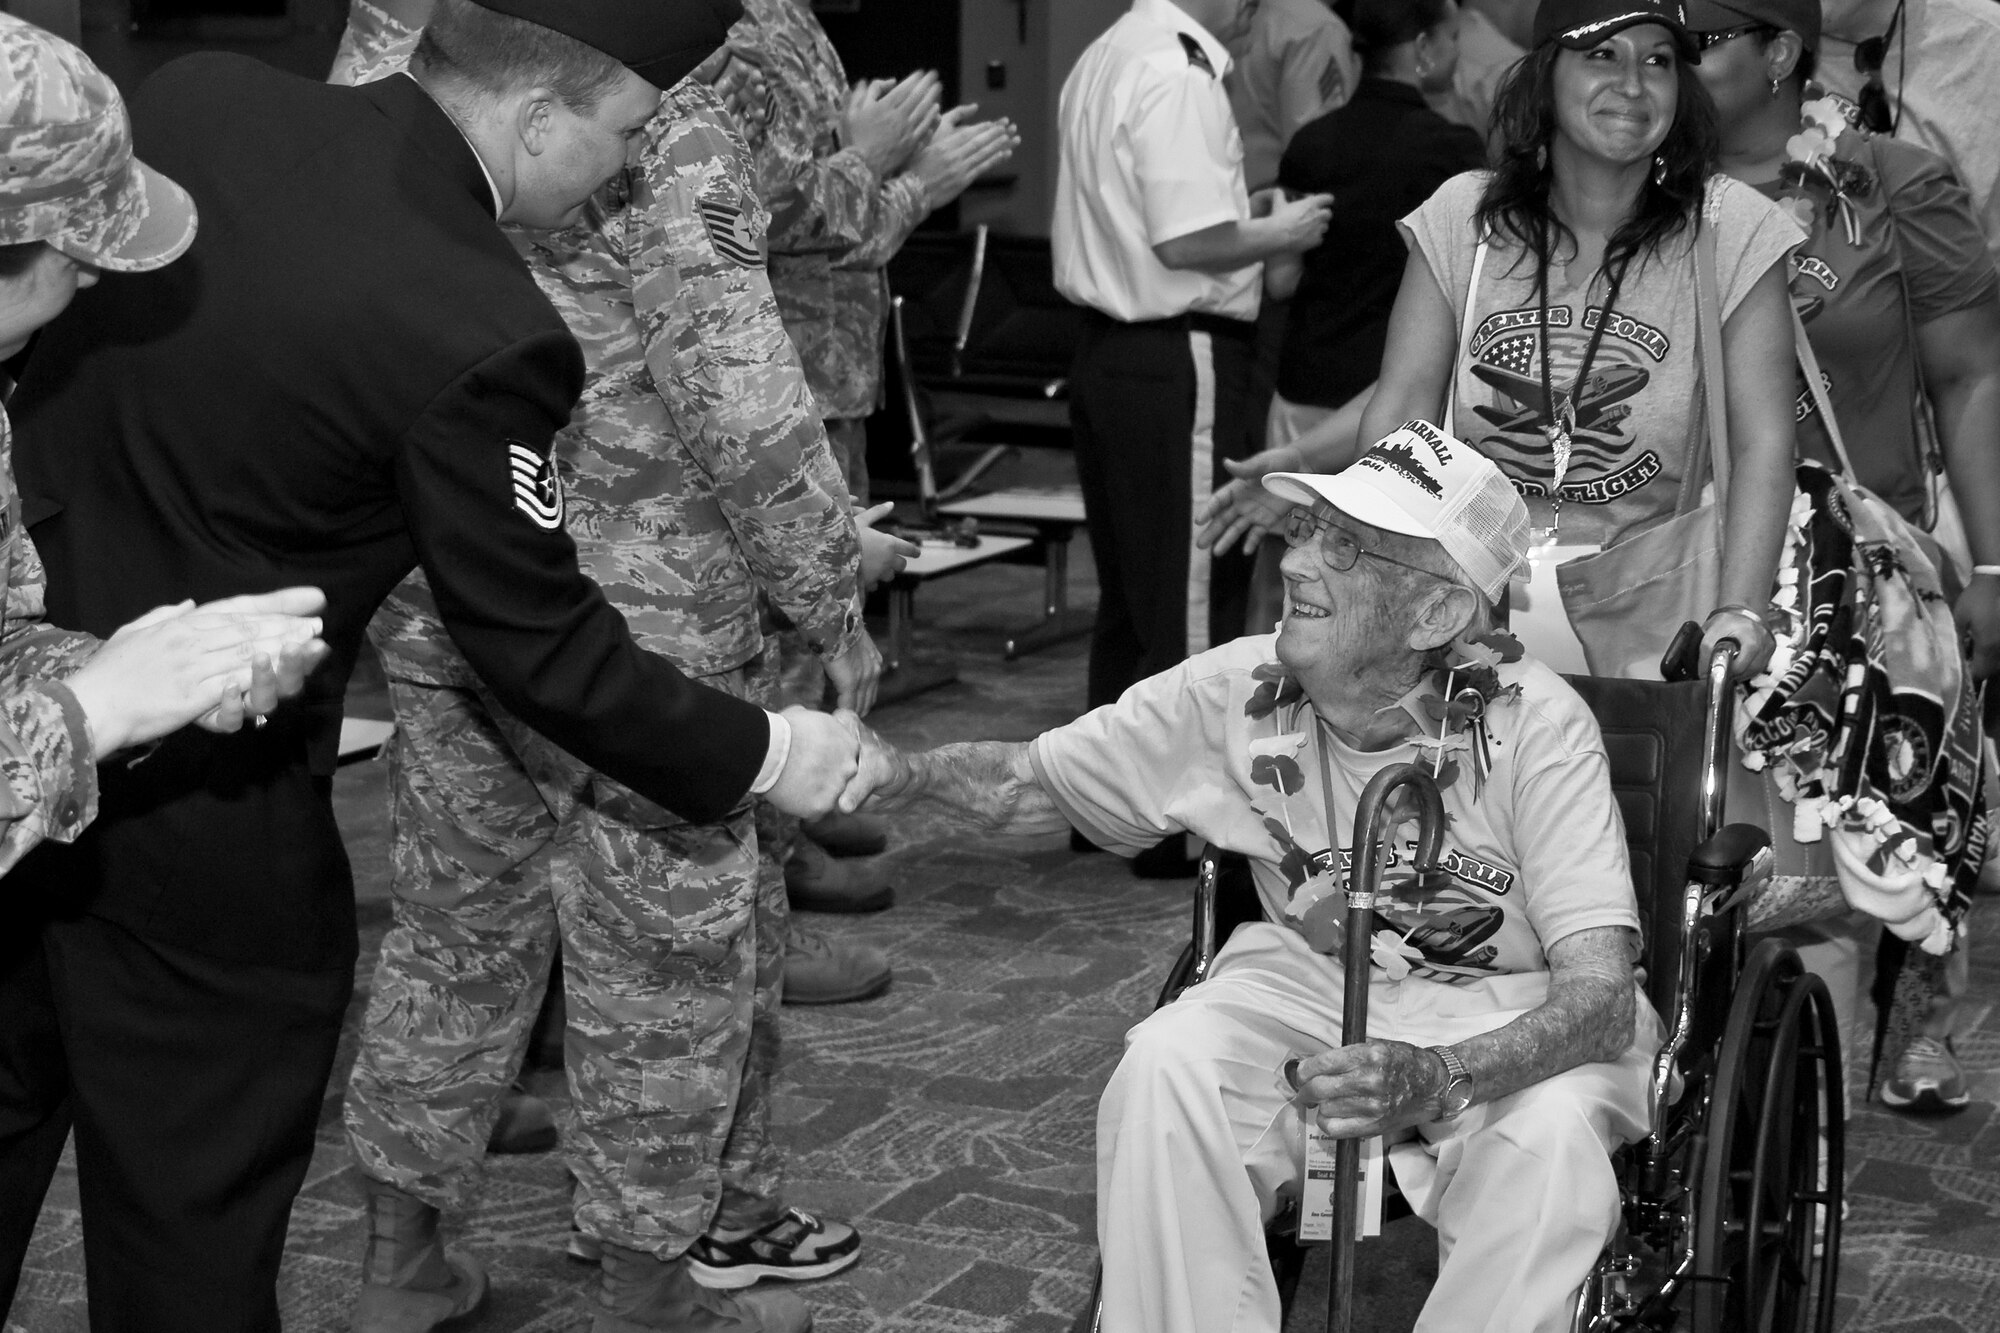 U.S. Air Force Tech. Sgt. Nicholas A. Connell of the 182nd Airlift Wing greets a U.S. Armed Forces veteran after his return home from the inaugural Greater Peoria Honor Flight at the General Wayne A. Downing Peoria International Airport in Peoria, Ill., June 4, 2013. The photo was one of five by Staff Sgt. Lealan C. Buehrer, photojournalist with the 182nd Airlift Wing, submitted to the National Guard Bureau media contest. Buehrer was announced the winner of the Air National Guard Outstanding New Photographer category on Feb. 3, 2014. (U.S. Air National Guard photo by Staff Sgt. Lealan Buehrer/Released)